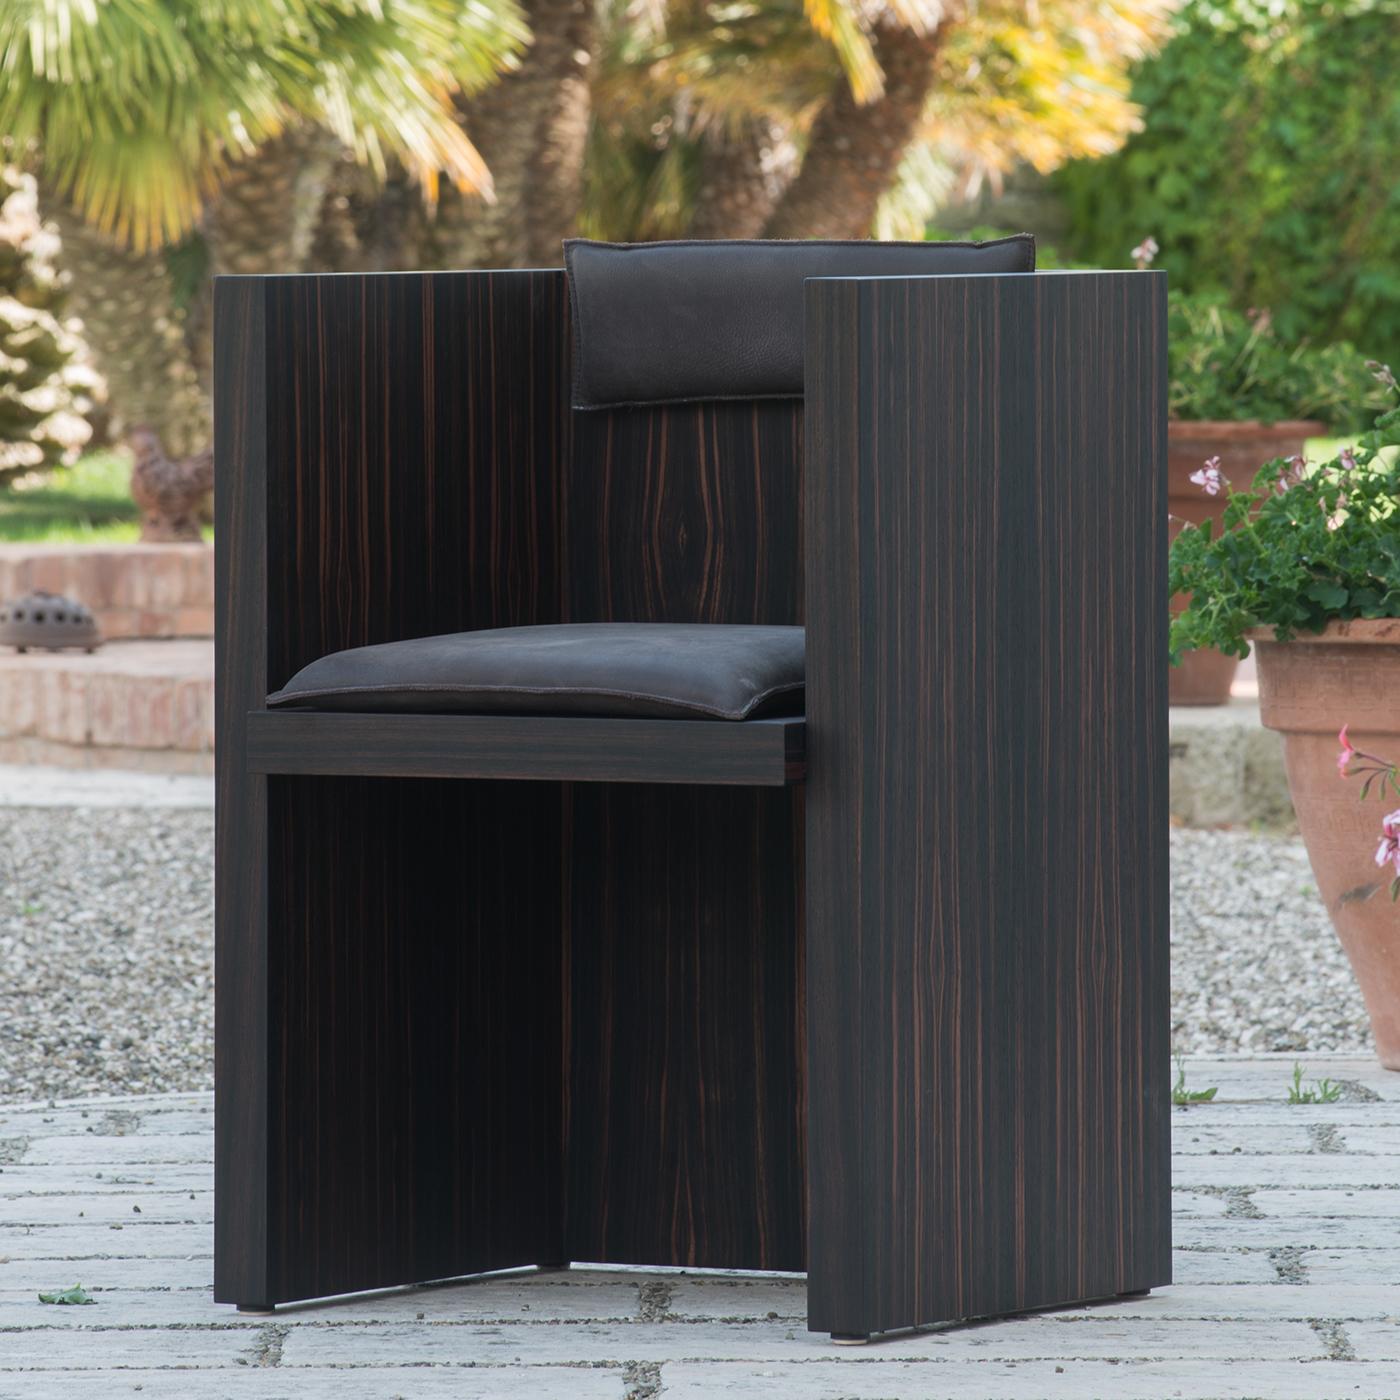 This boxy, square chair is shaped in the form of an H. Made from ebony wood that originated in Madagascar, it has a regal, authoritative, throne-like look, making it perfect for a home or office setting. Its dark structure is accented by genuine